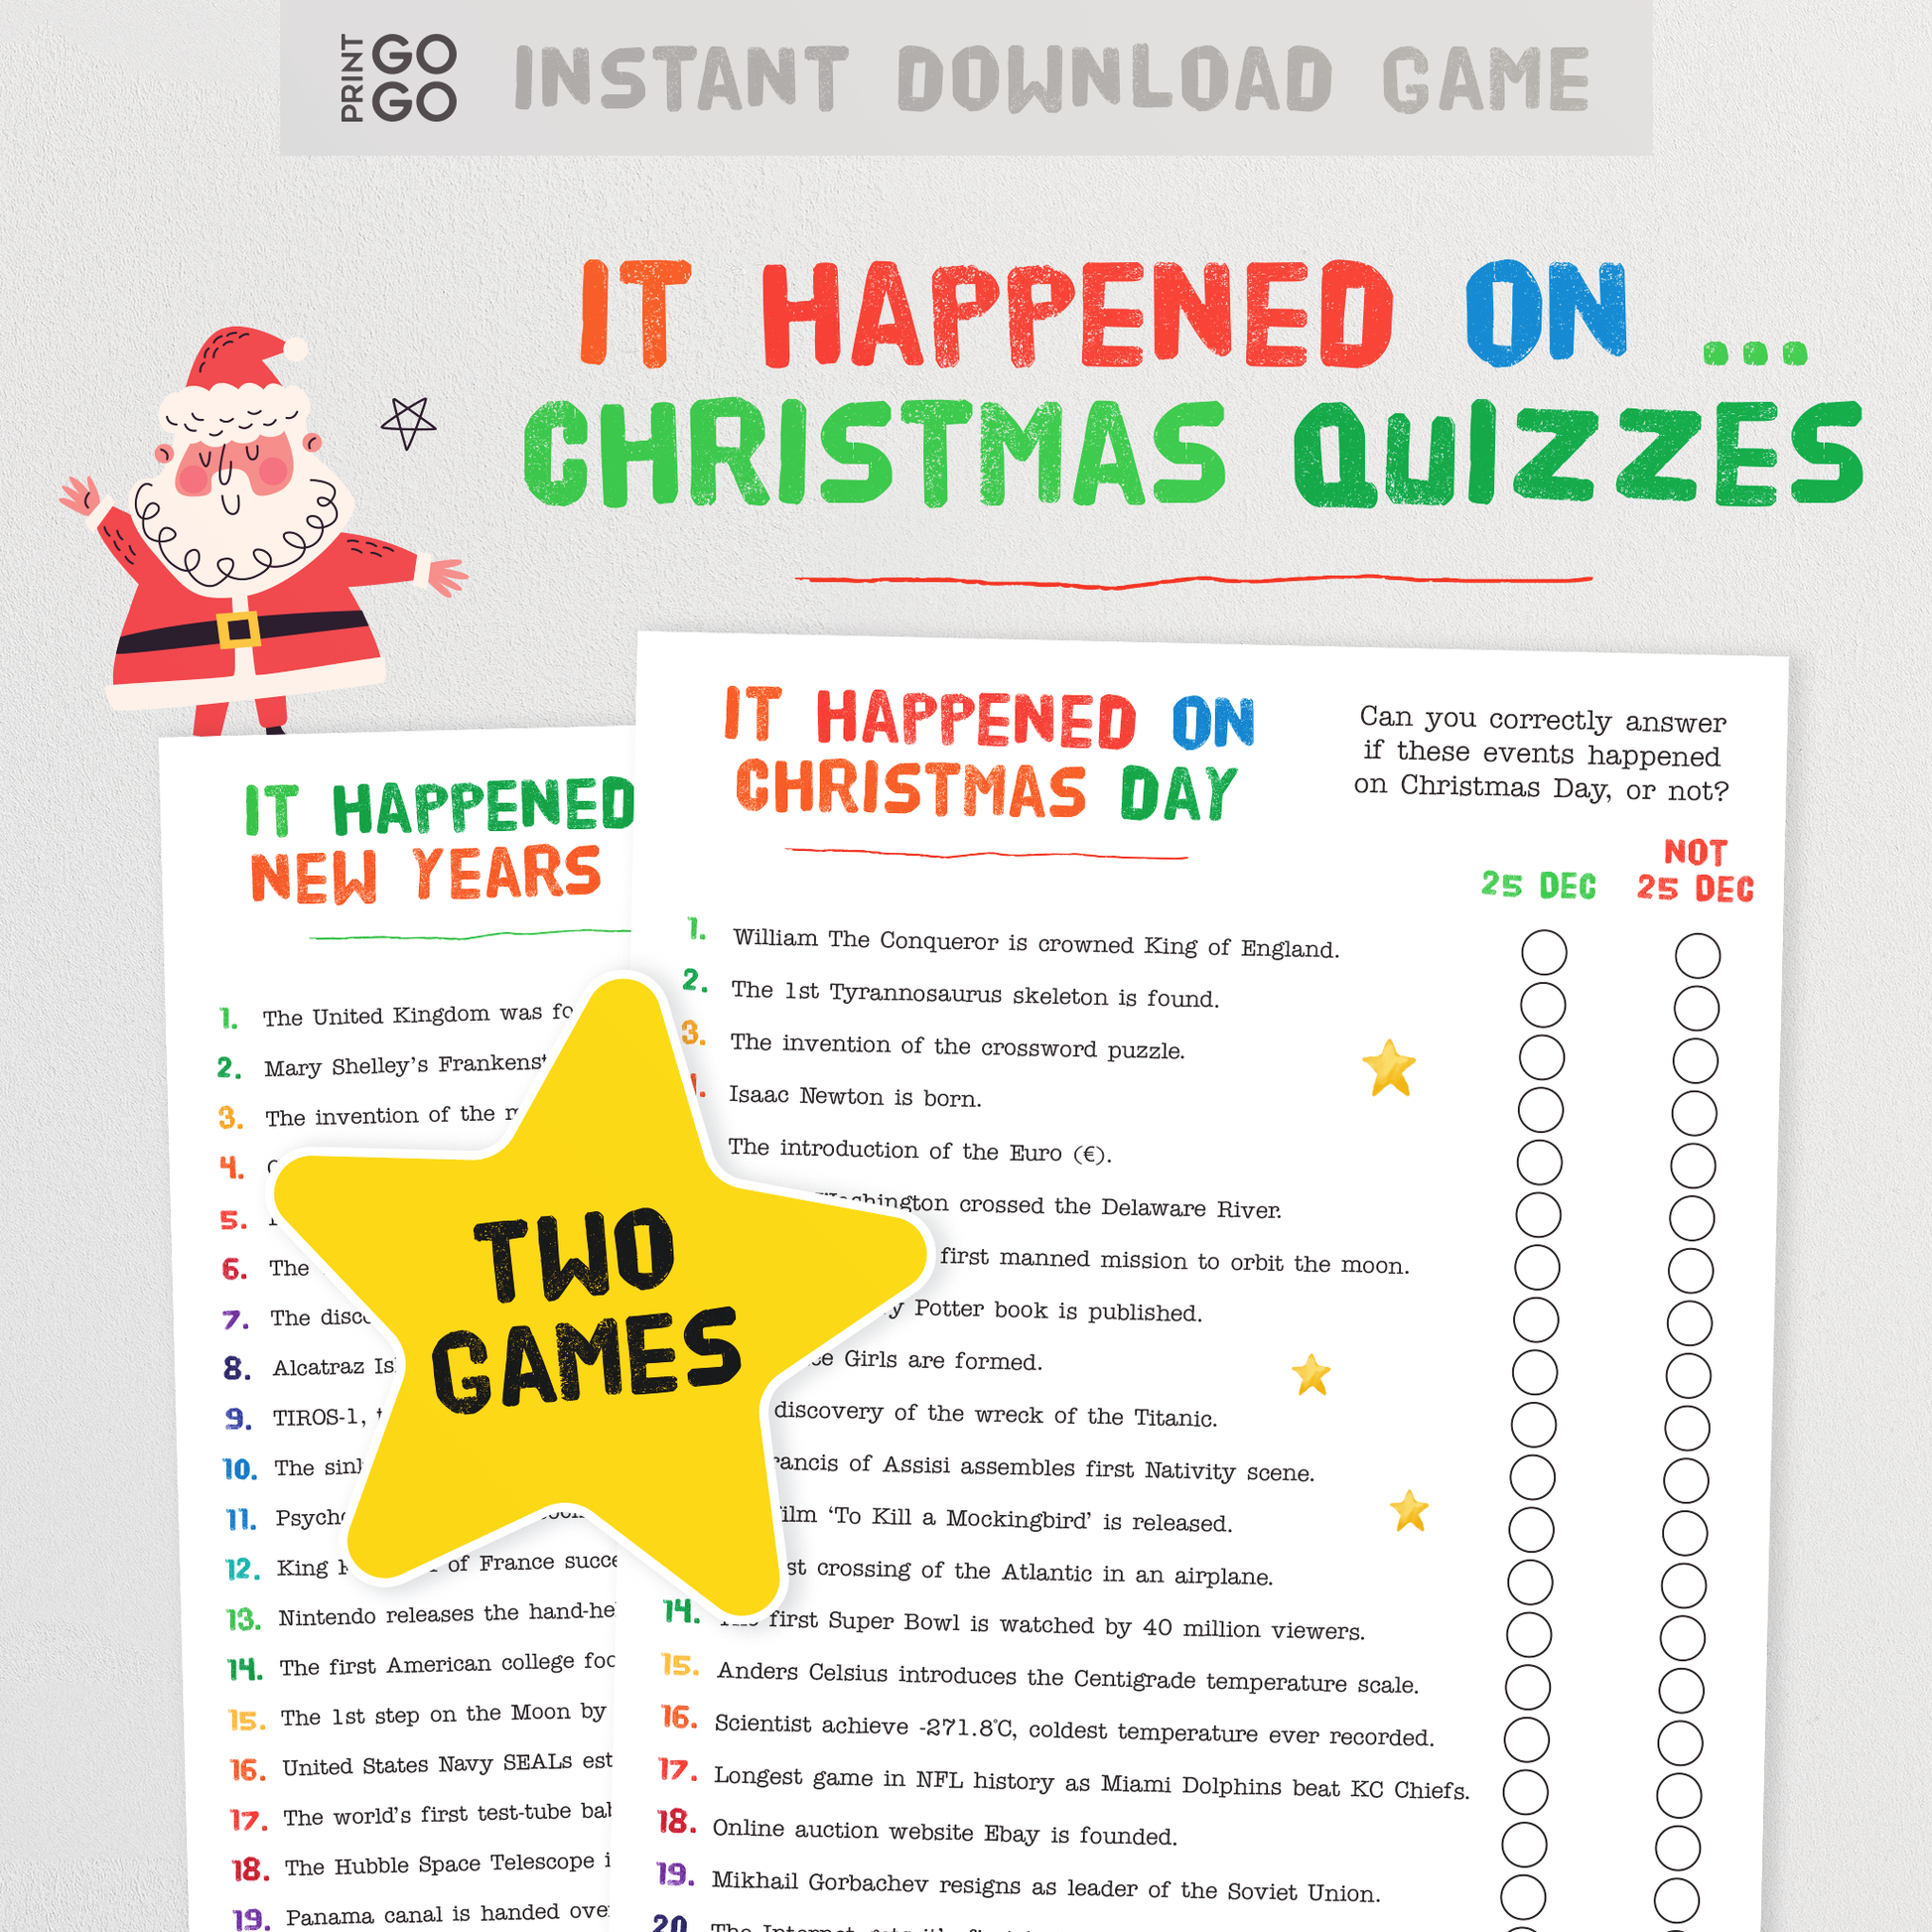 It Happened on ... Christmas and New Year Quiz